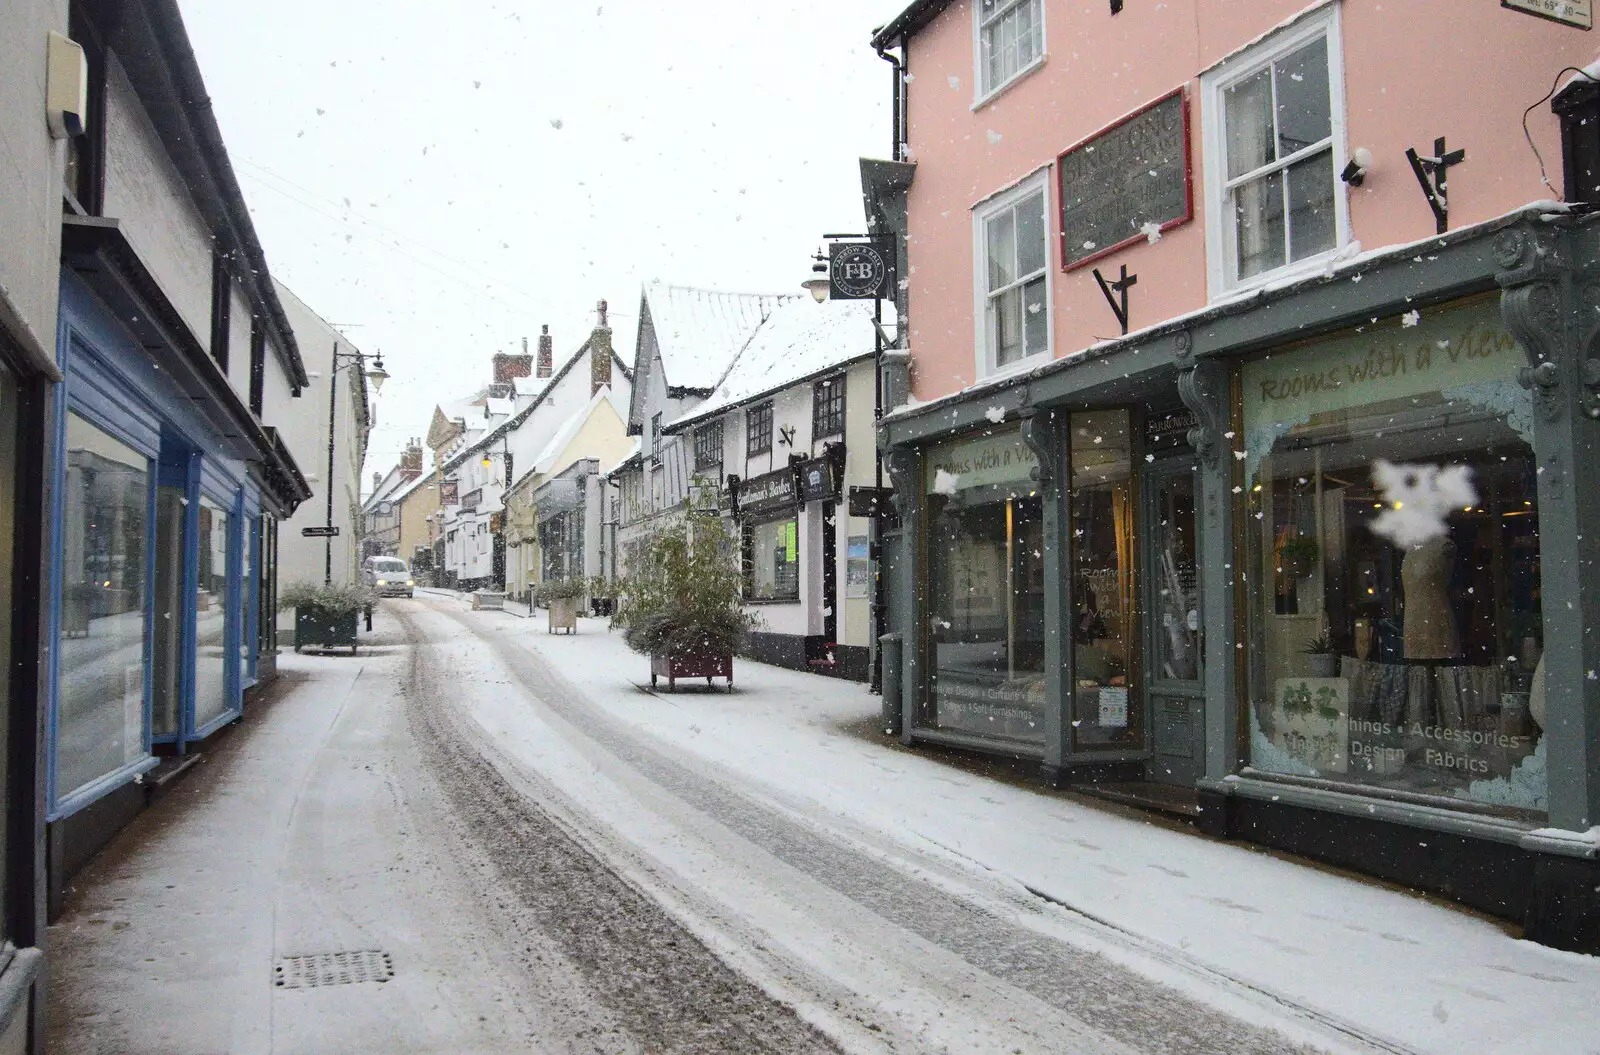 Further up St. Nicholas Street, from A Snowy Morning, Diss, Norfolk - 16th January 2021